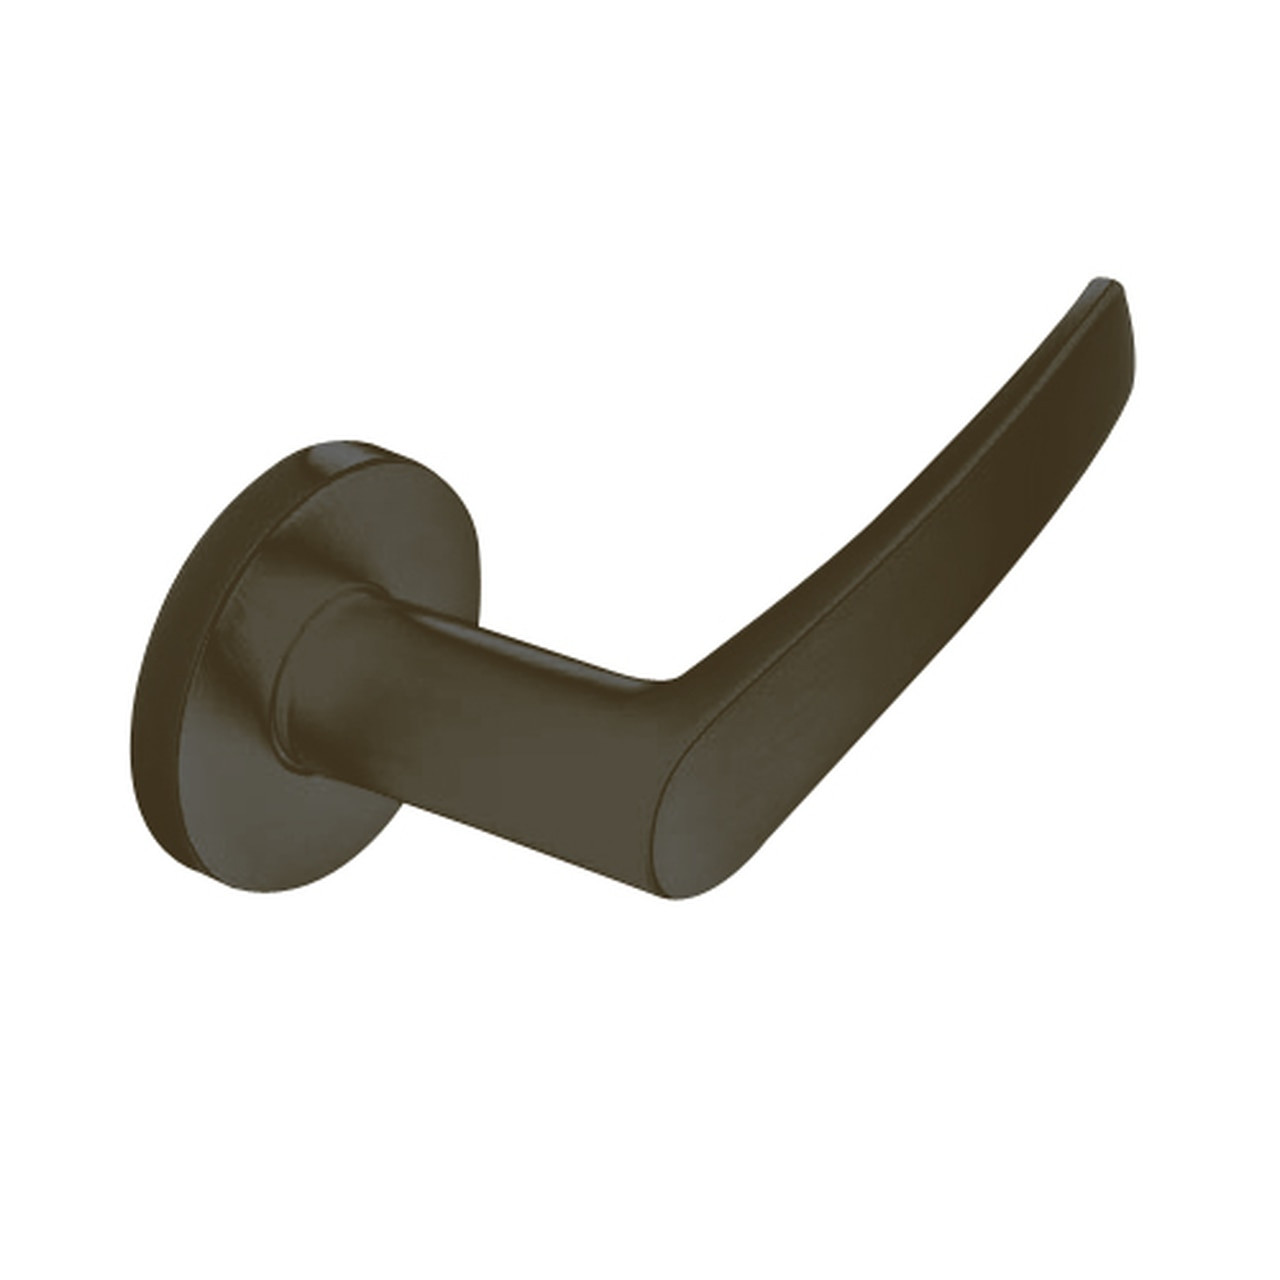 ML2024-ASF-613-LC Corbin Russwin ML2000 Series Mortise Entrance Locksets with Armstrong Lever in Oil Rubbed Bronze